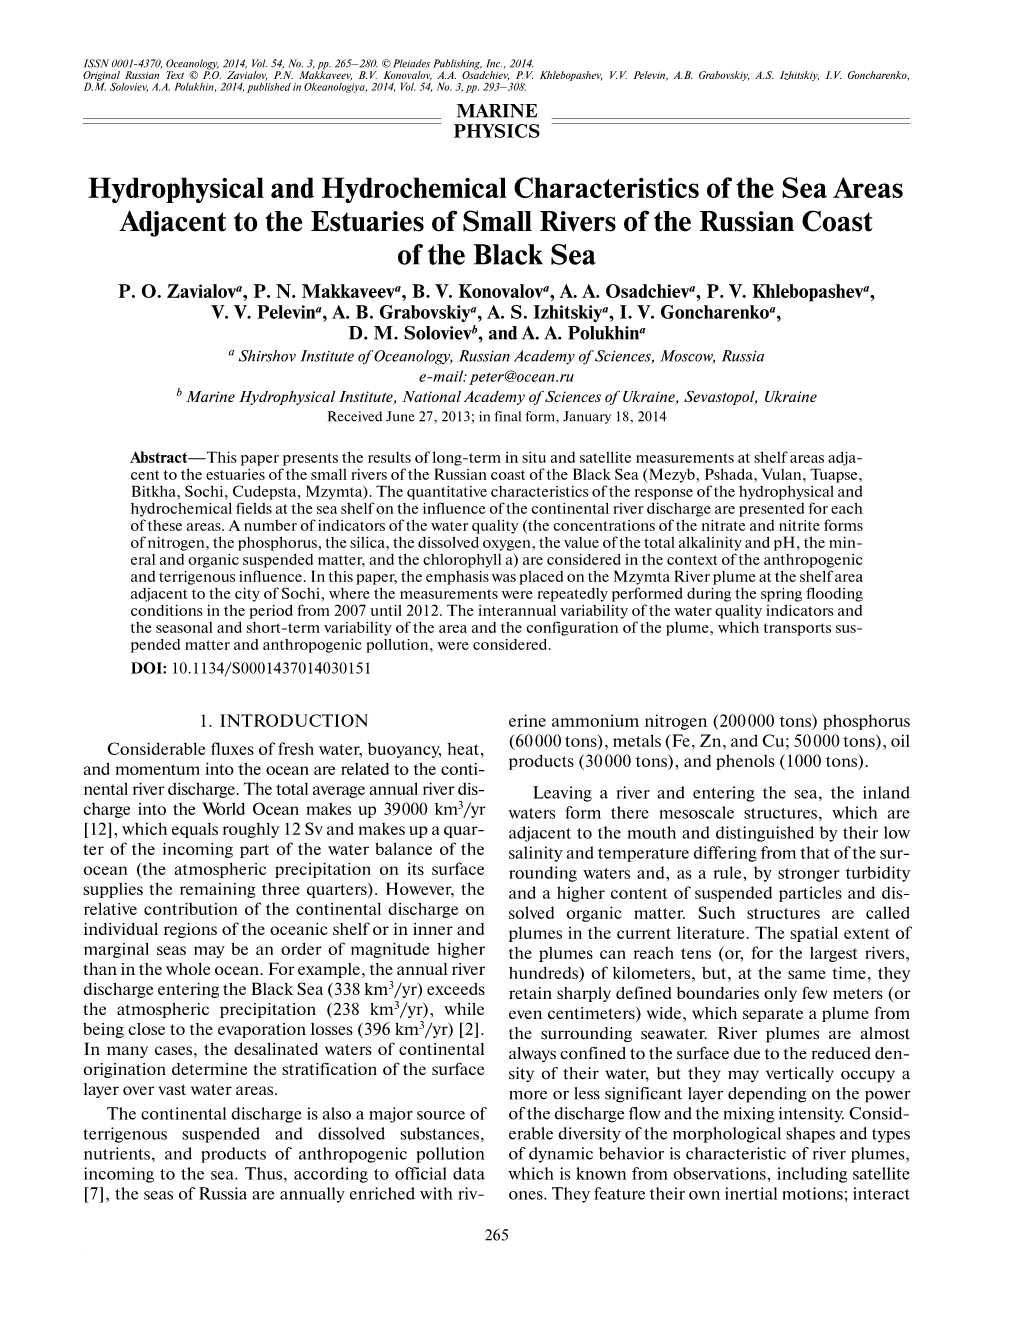 Hydrophysical and Hydrochemical Characteristics of the Sea Areas Adjacent to the Estuaries of Small Rivers of the Russian Coast of the Black Sea P